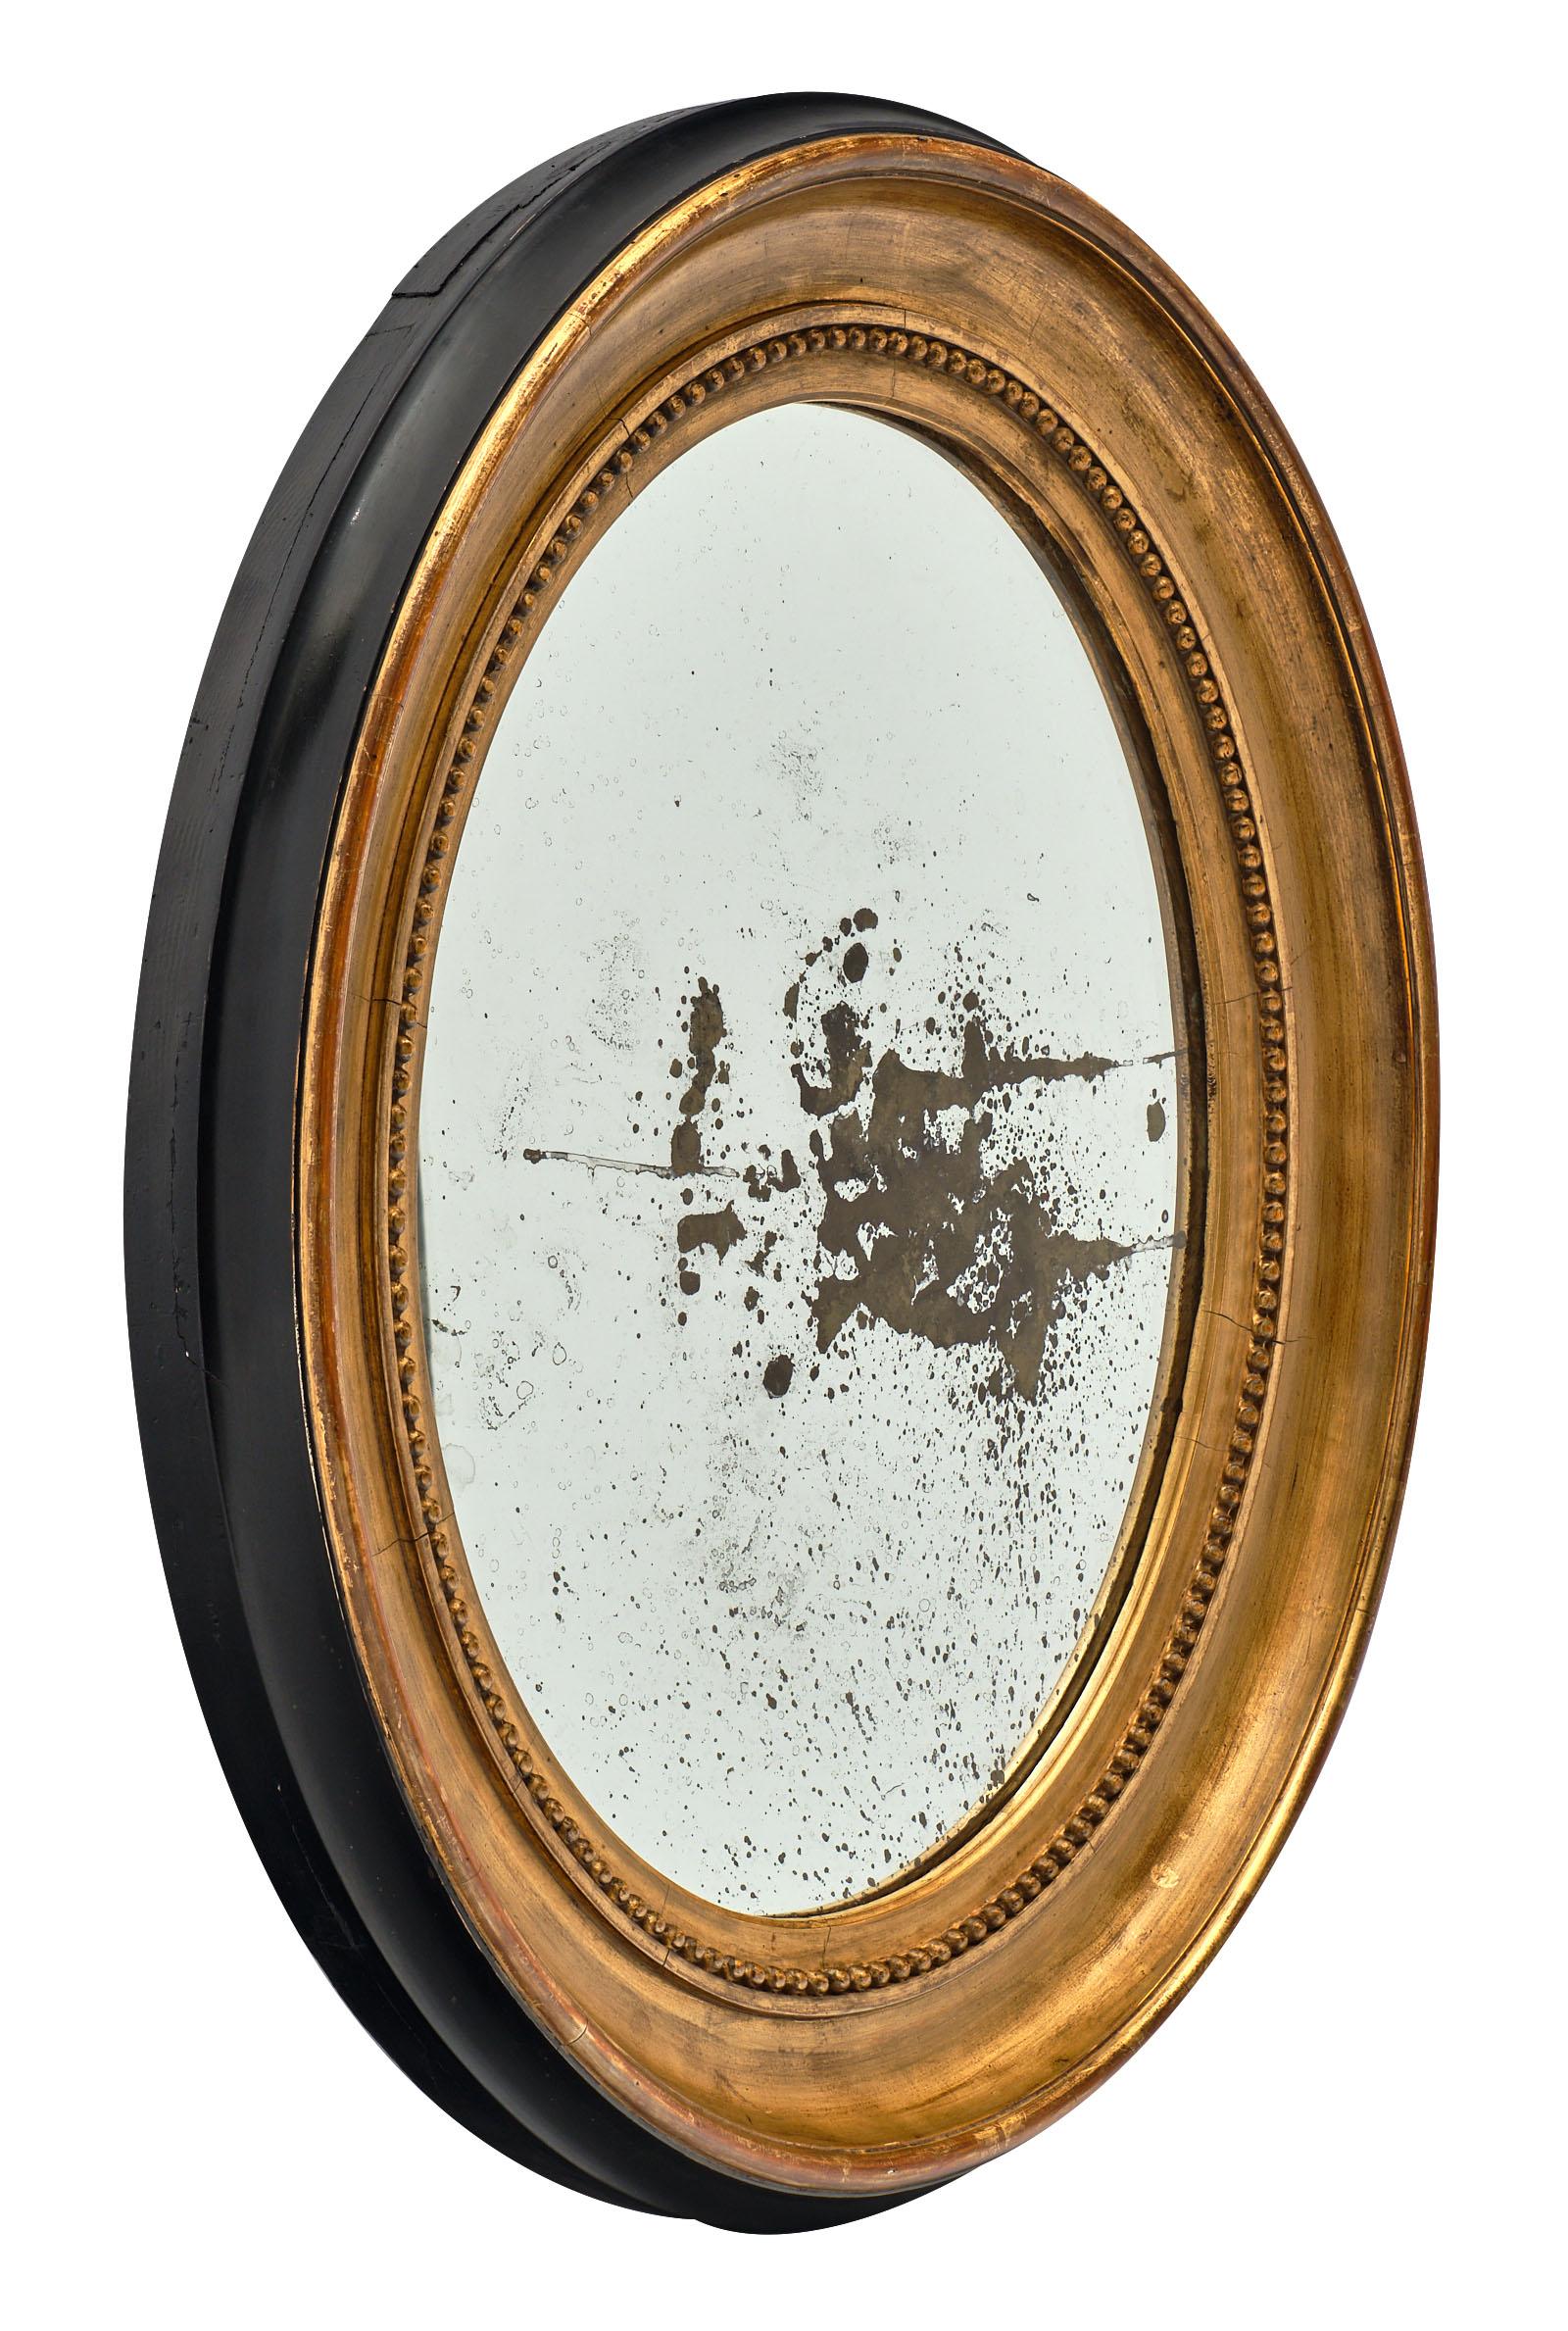 Late 18th Century Oval Louis XVI Period French Mirror